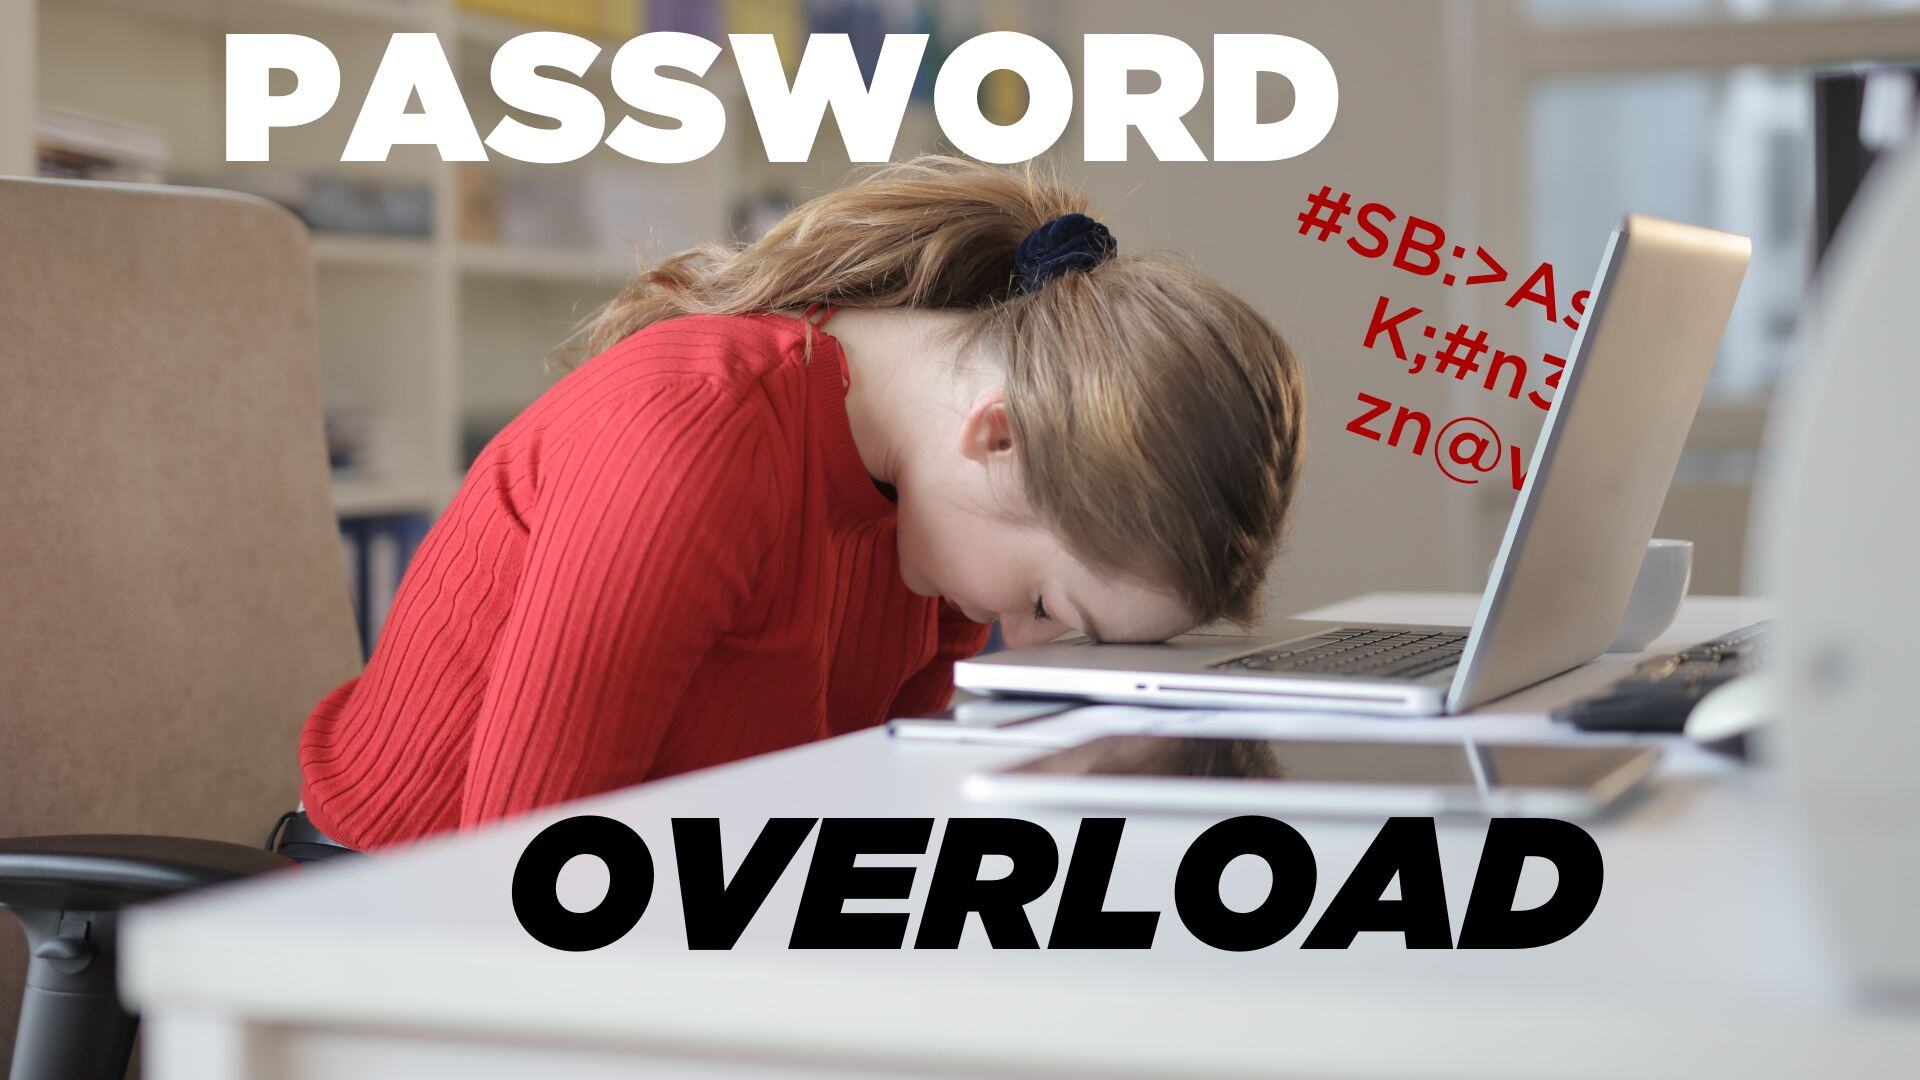 1 in 4 people struggle with password overload